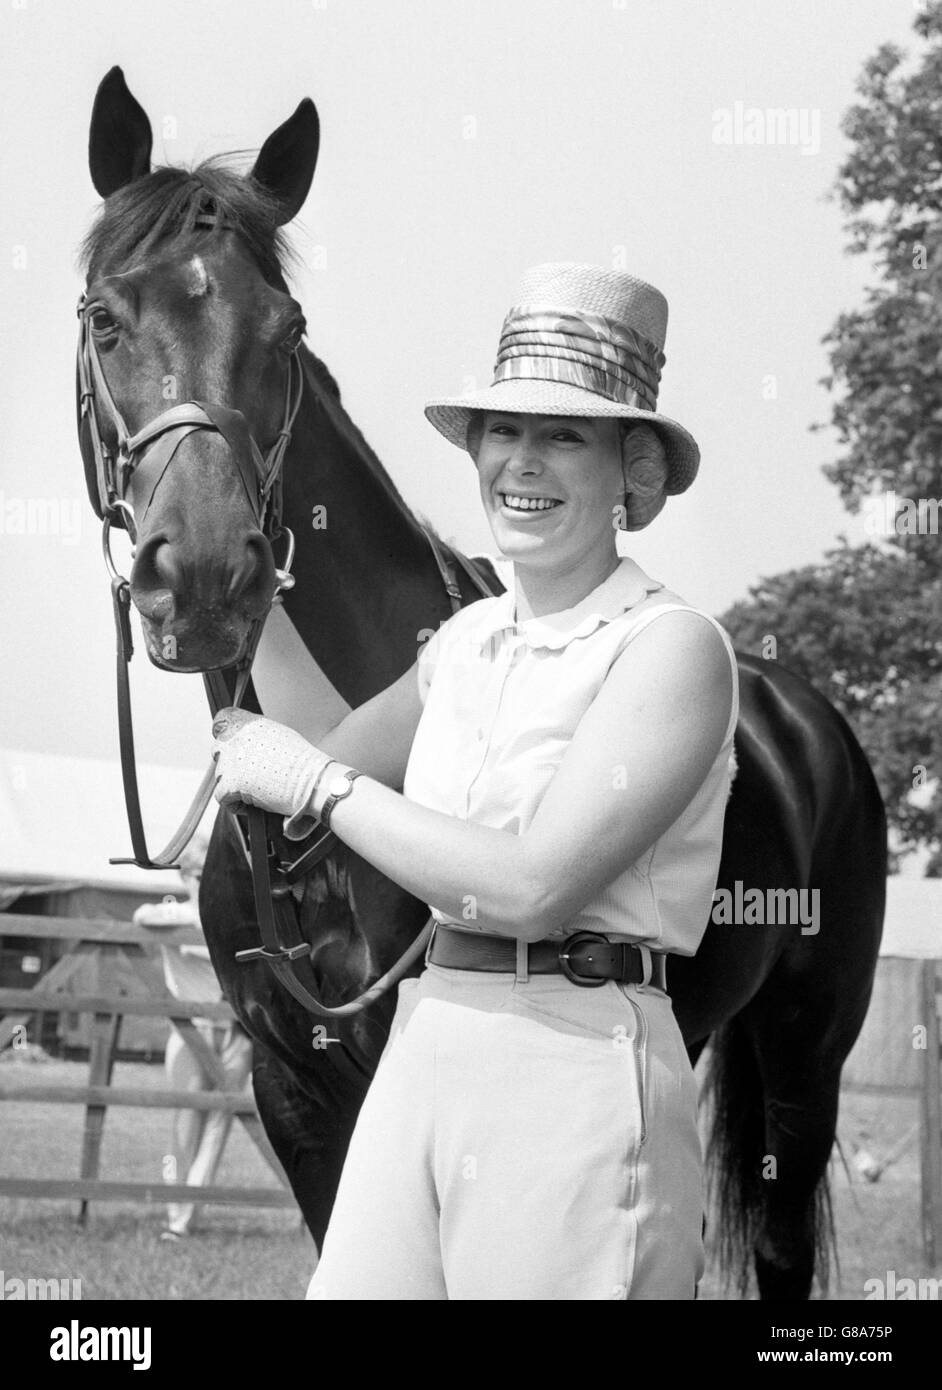 Gail Ross, of Alberta, Canada, finds summer comfort in a straw topper at Richmond Royal Horse Show, Surrey. She is pictured with her black gelding The Hood, whom she is competing in Class 7, the Ladies' Jumping Competition. Stock Photo